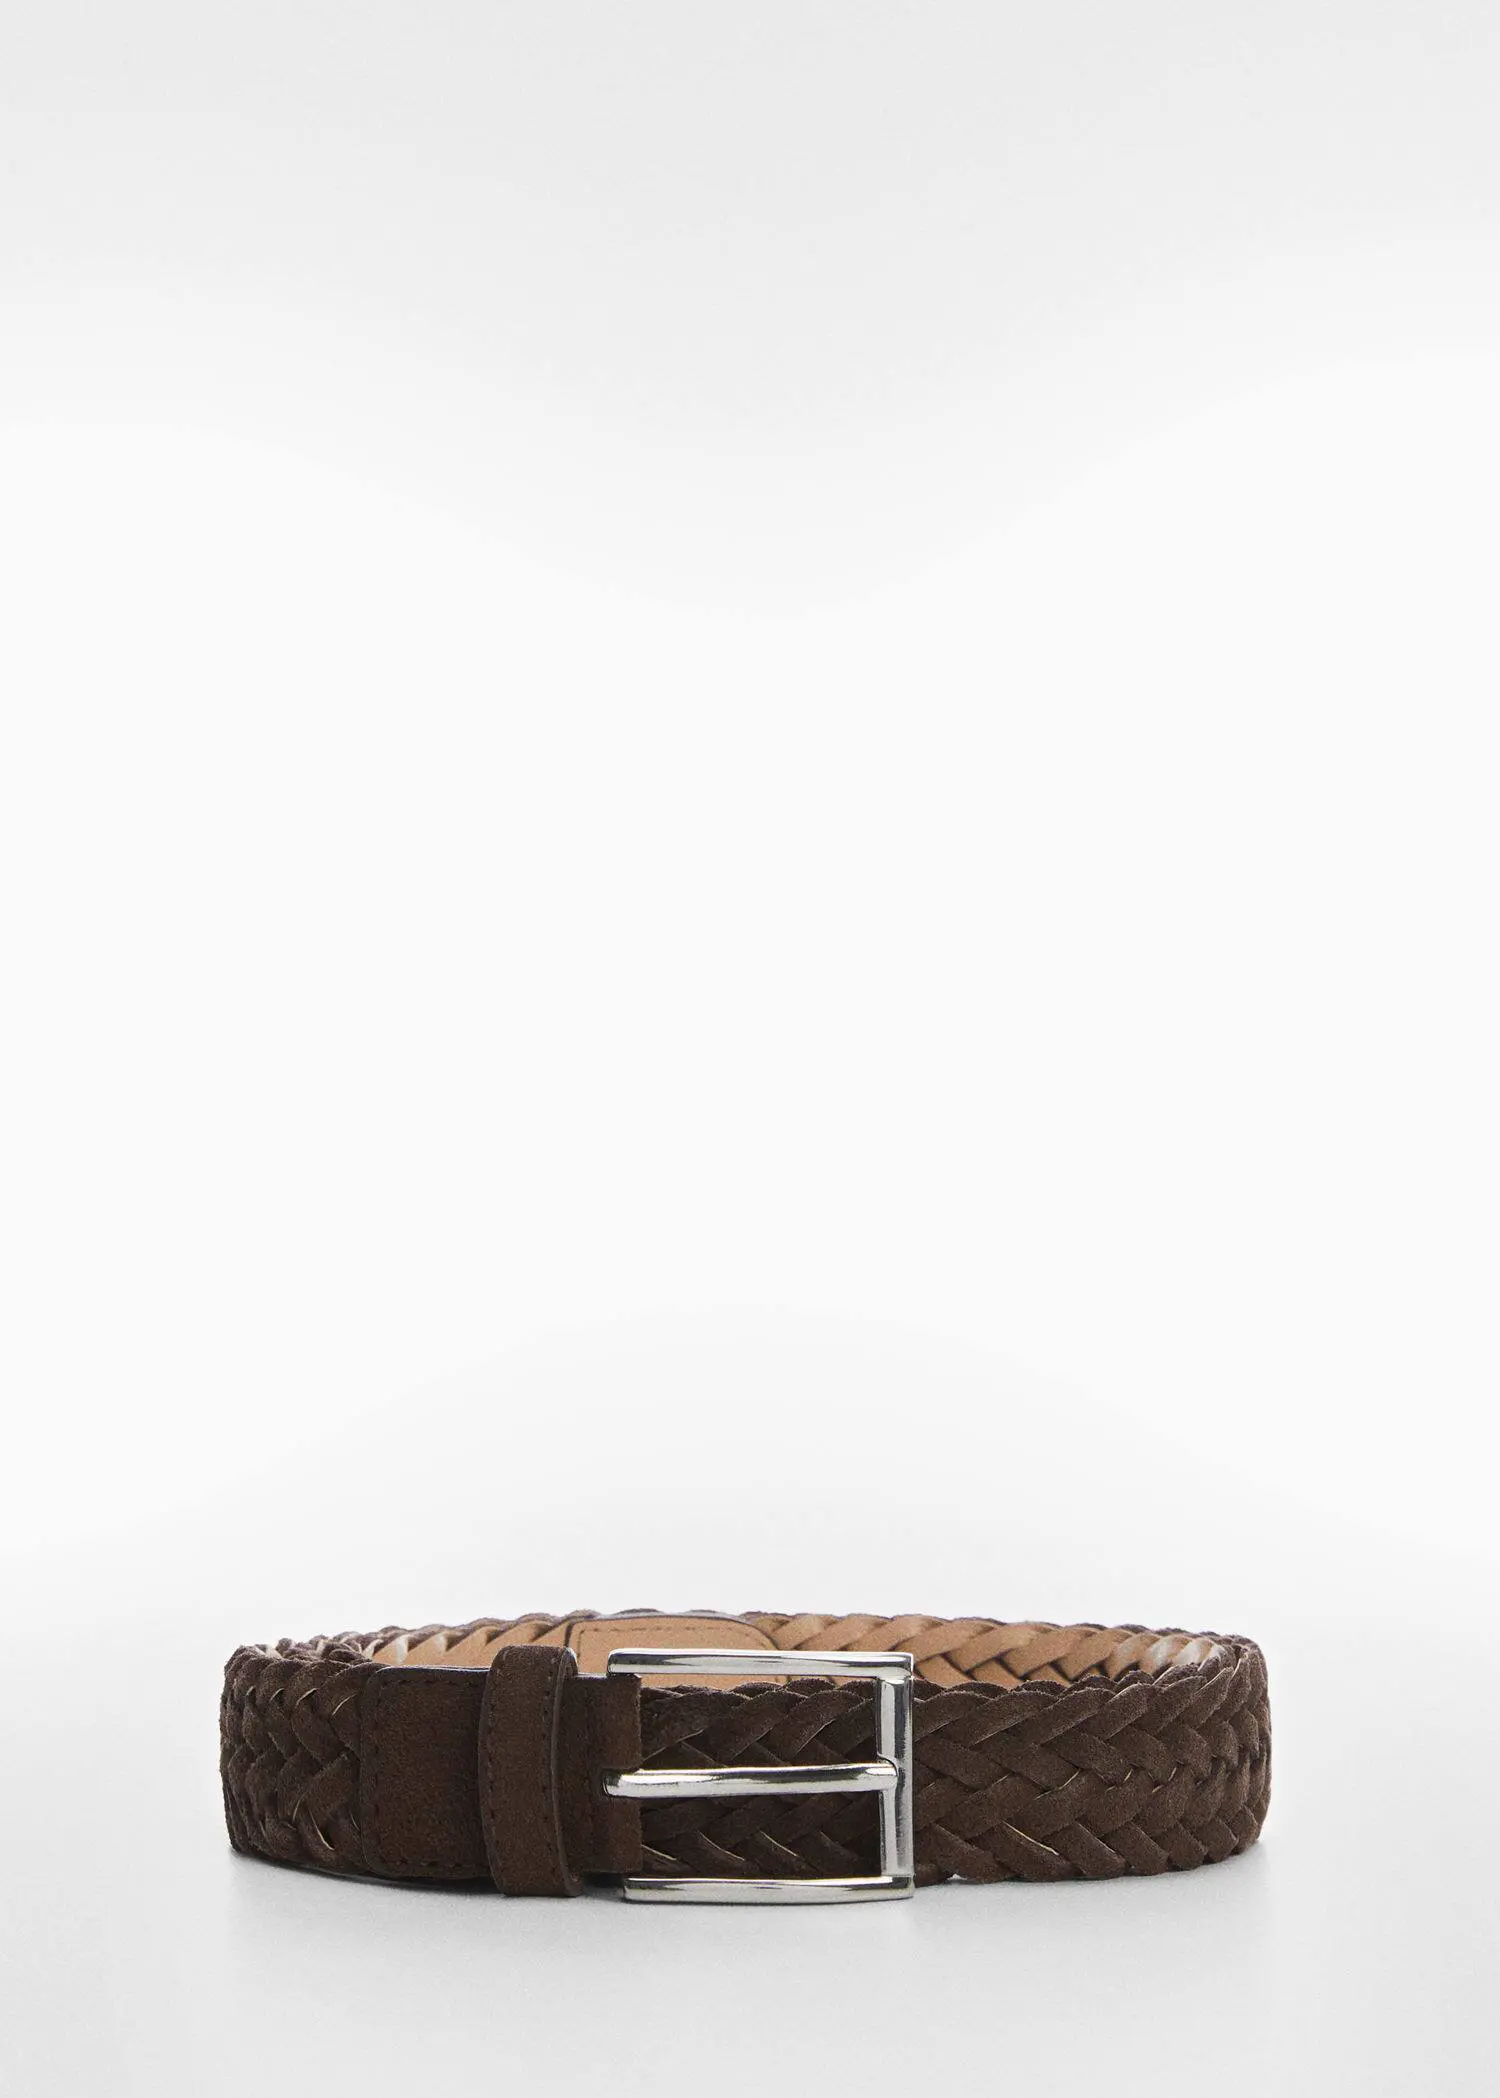 Mango Braided suede belt. a close up of a belt on a white background 